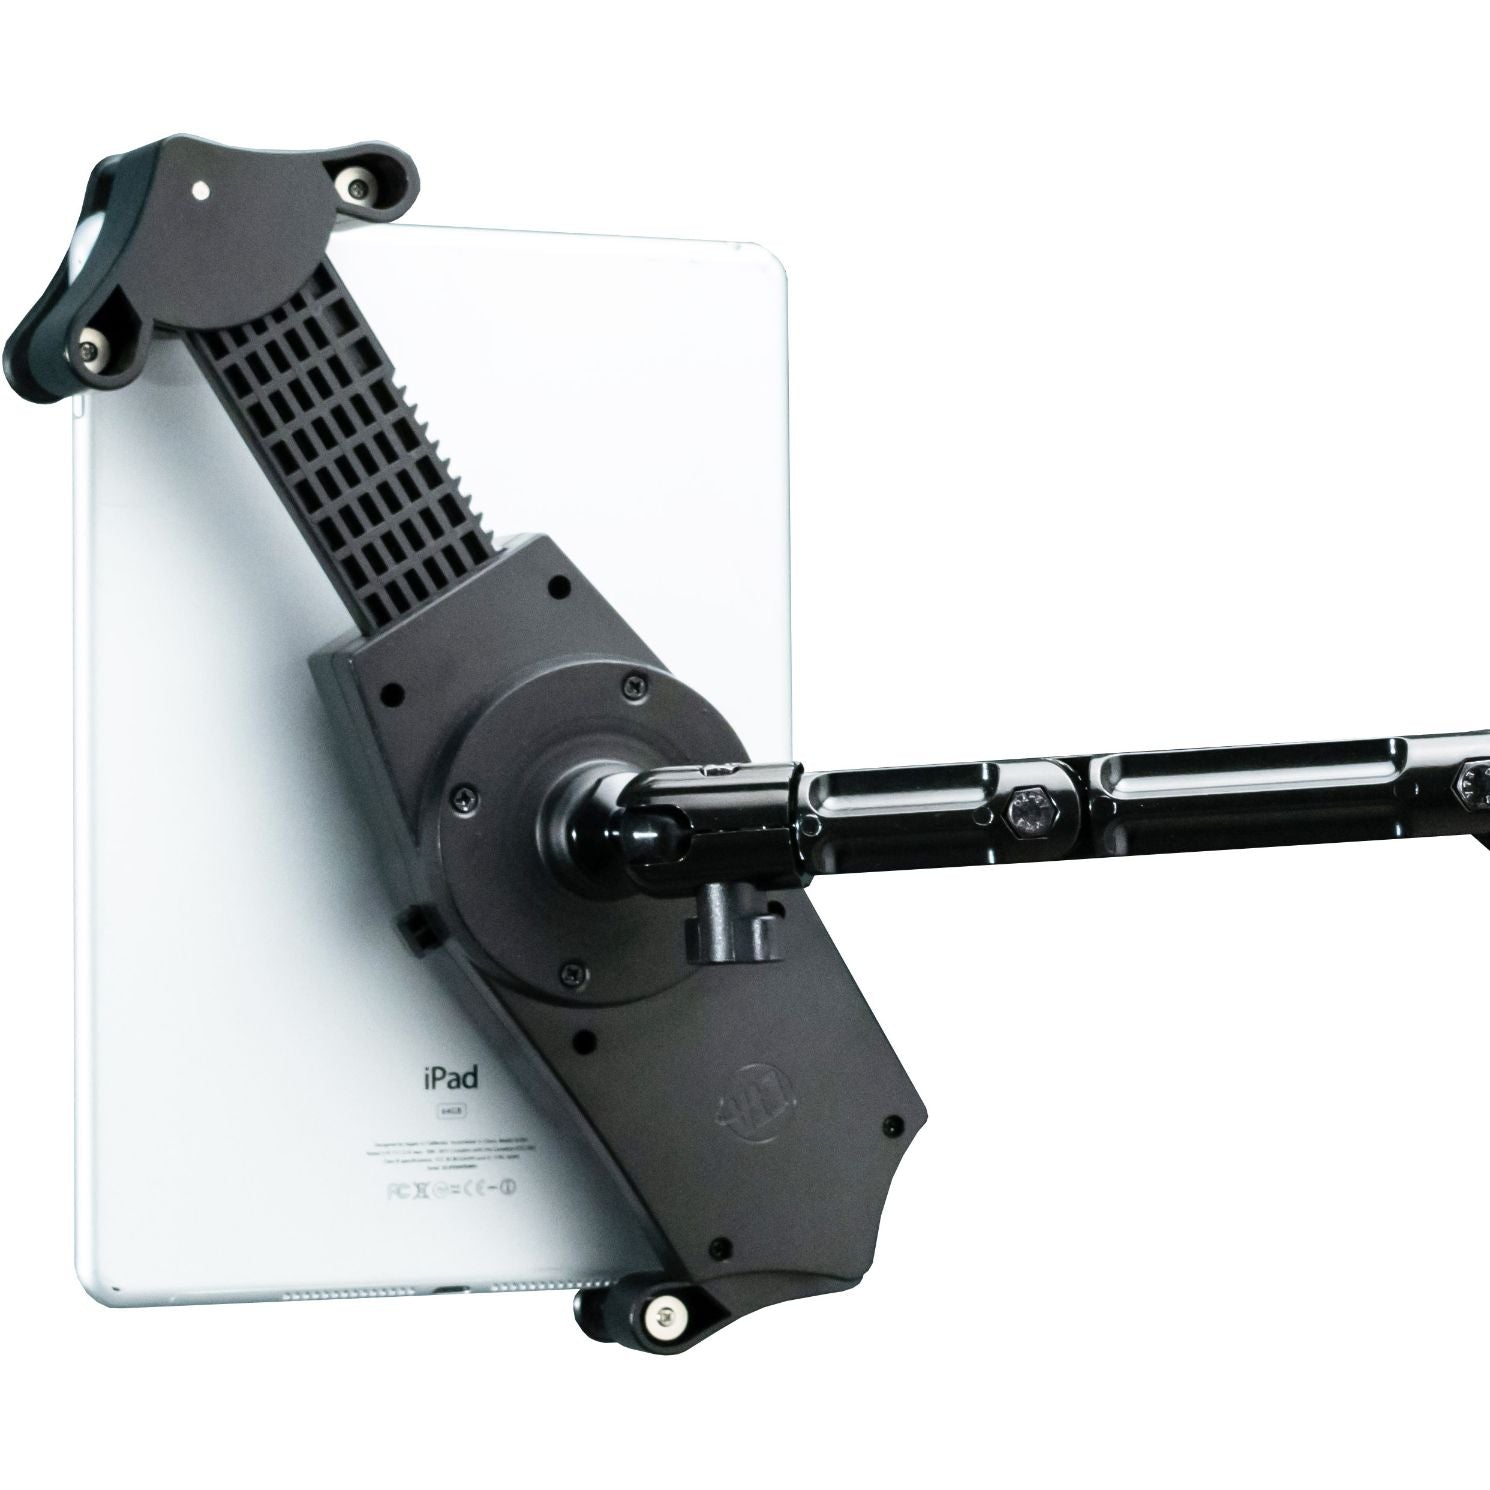 Custom Flex Suction Mount for 7-14 Inch Tablets, including 13-inch iPad Air M2/ Pro M4 (2024), iPad 10.2-inch (7th/ 8th/ 9th Gen.) and more